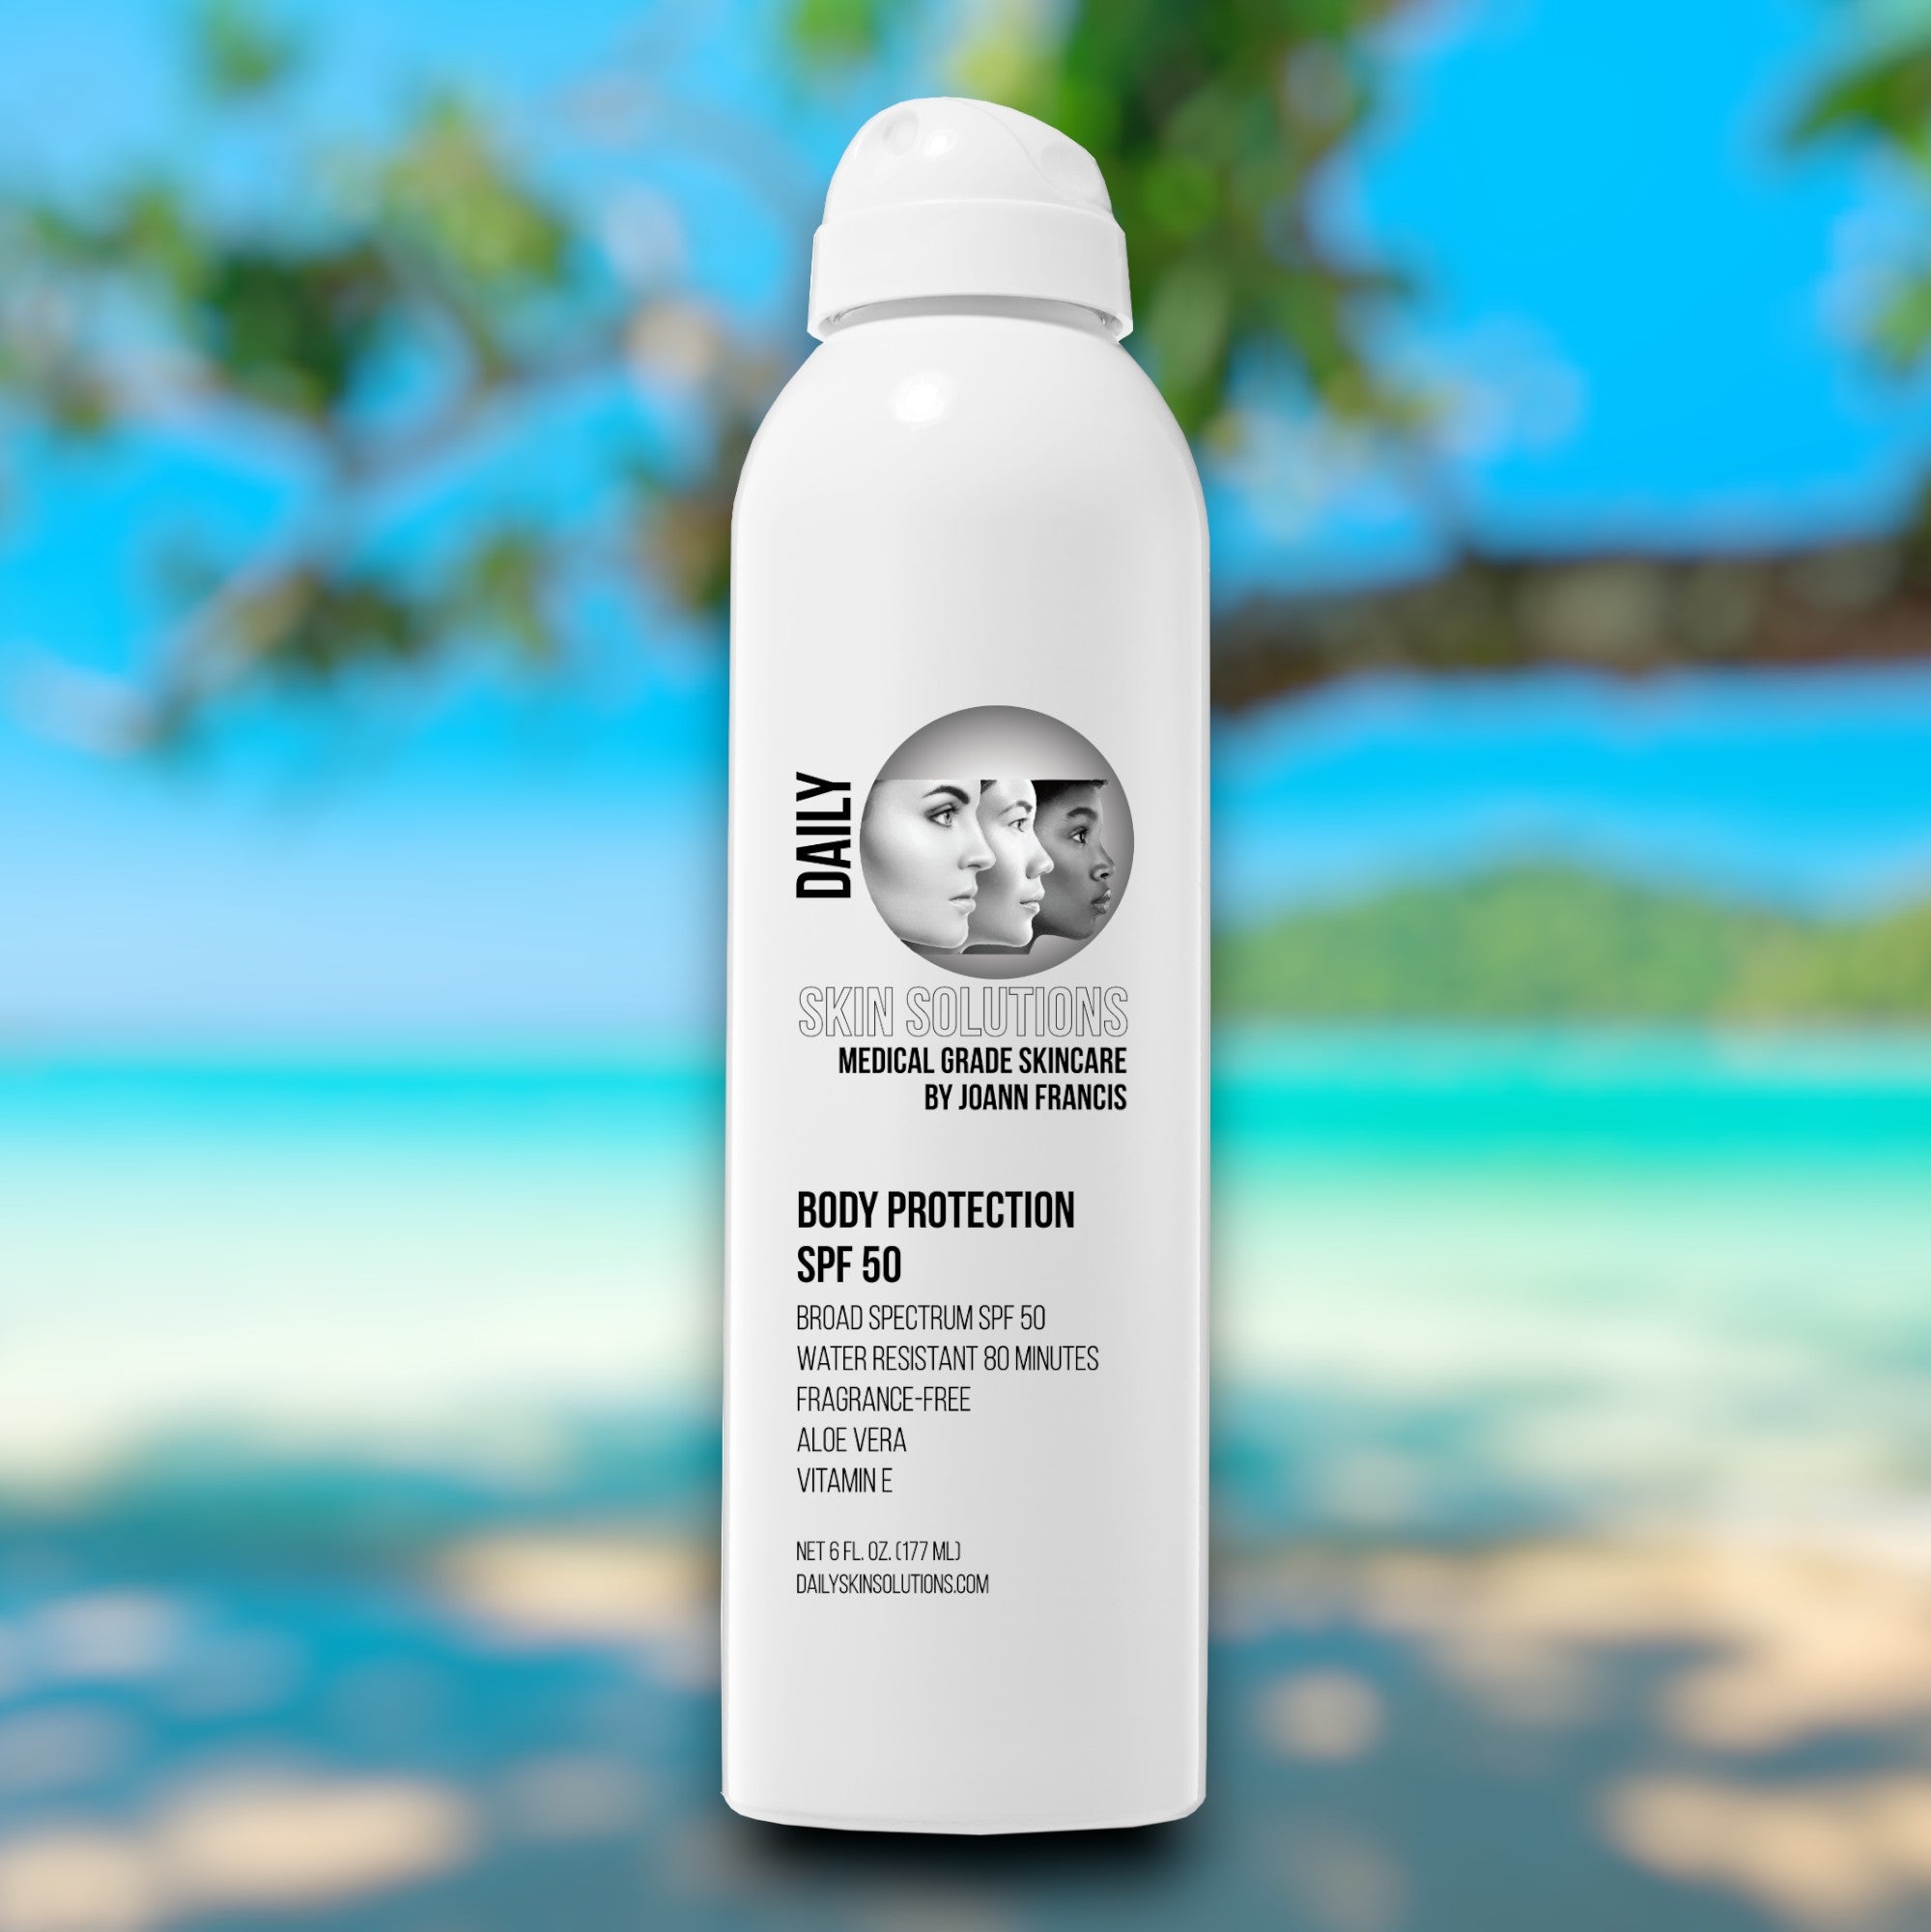 Body Protection SPF 50 by Daily Skin Solutions